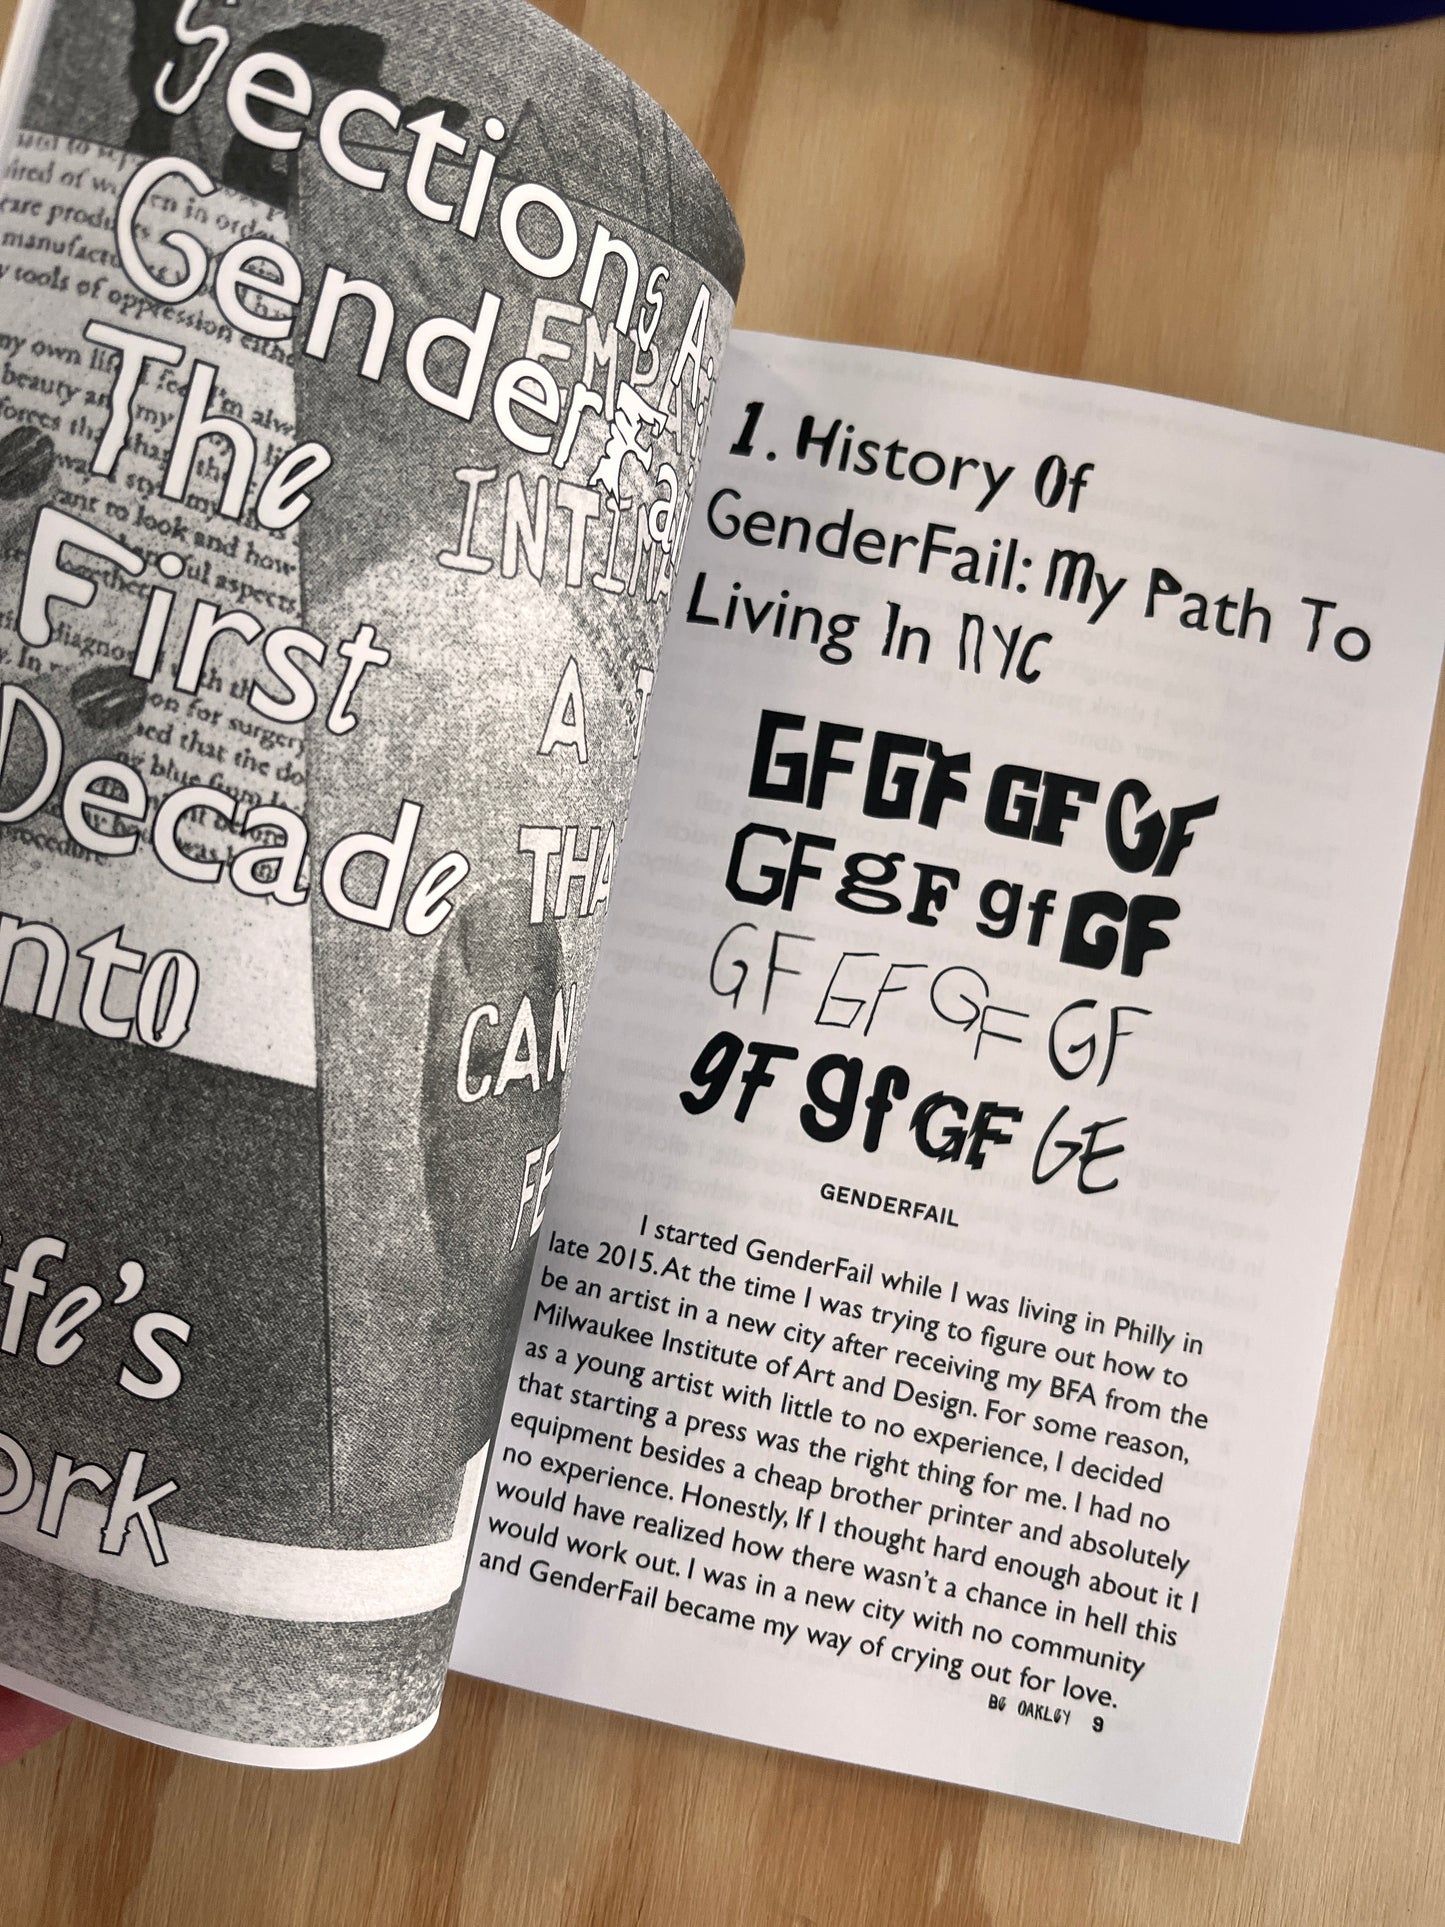 Publishing now: GenderFail’s working class guide to making a living off self publishing 2nd Edition